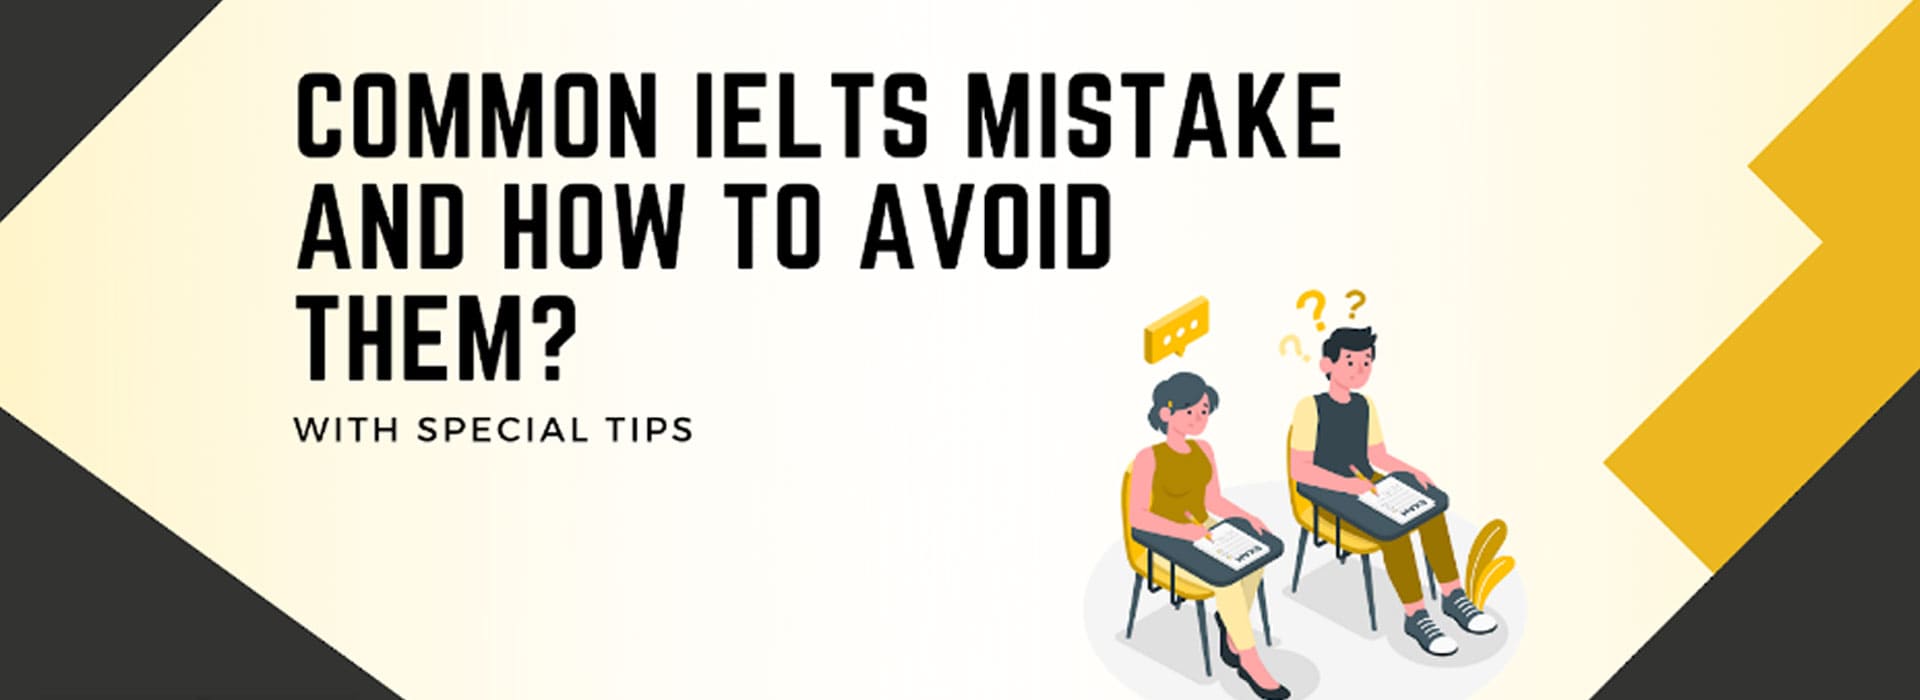 Common IELTS Mistake and How to avoid them?